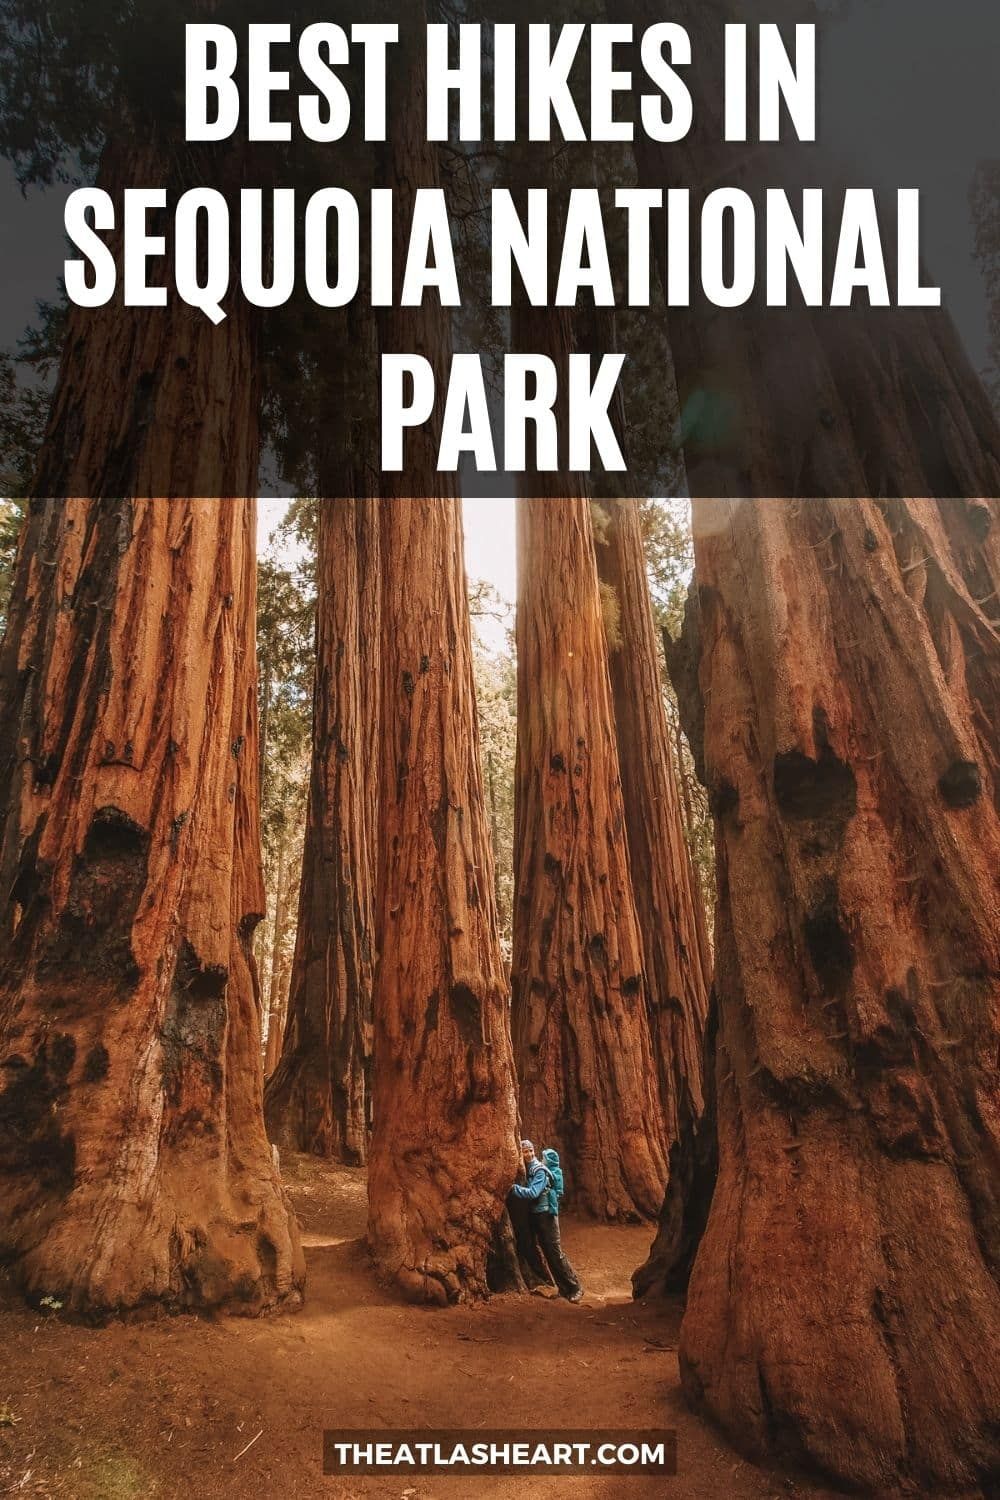 21 Best Hikes in Sequoia National Park & Kings Canyon